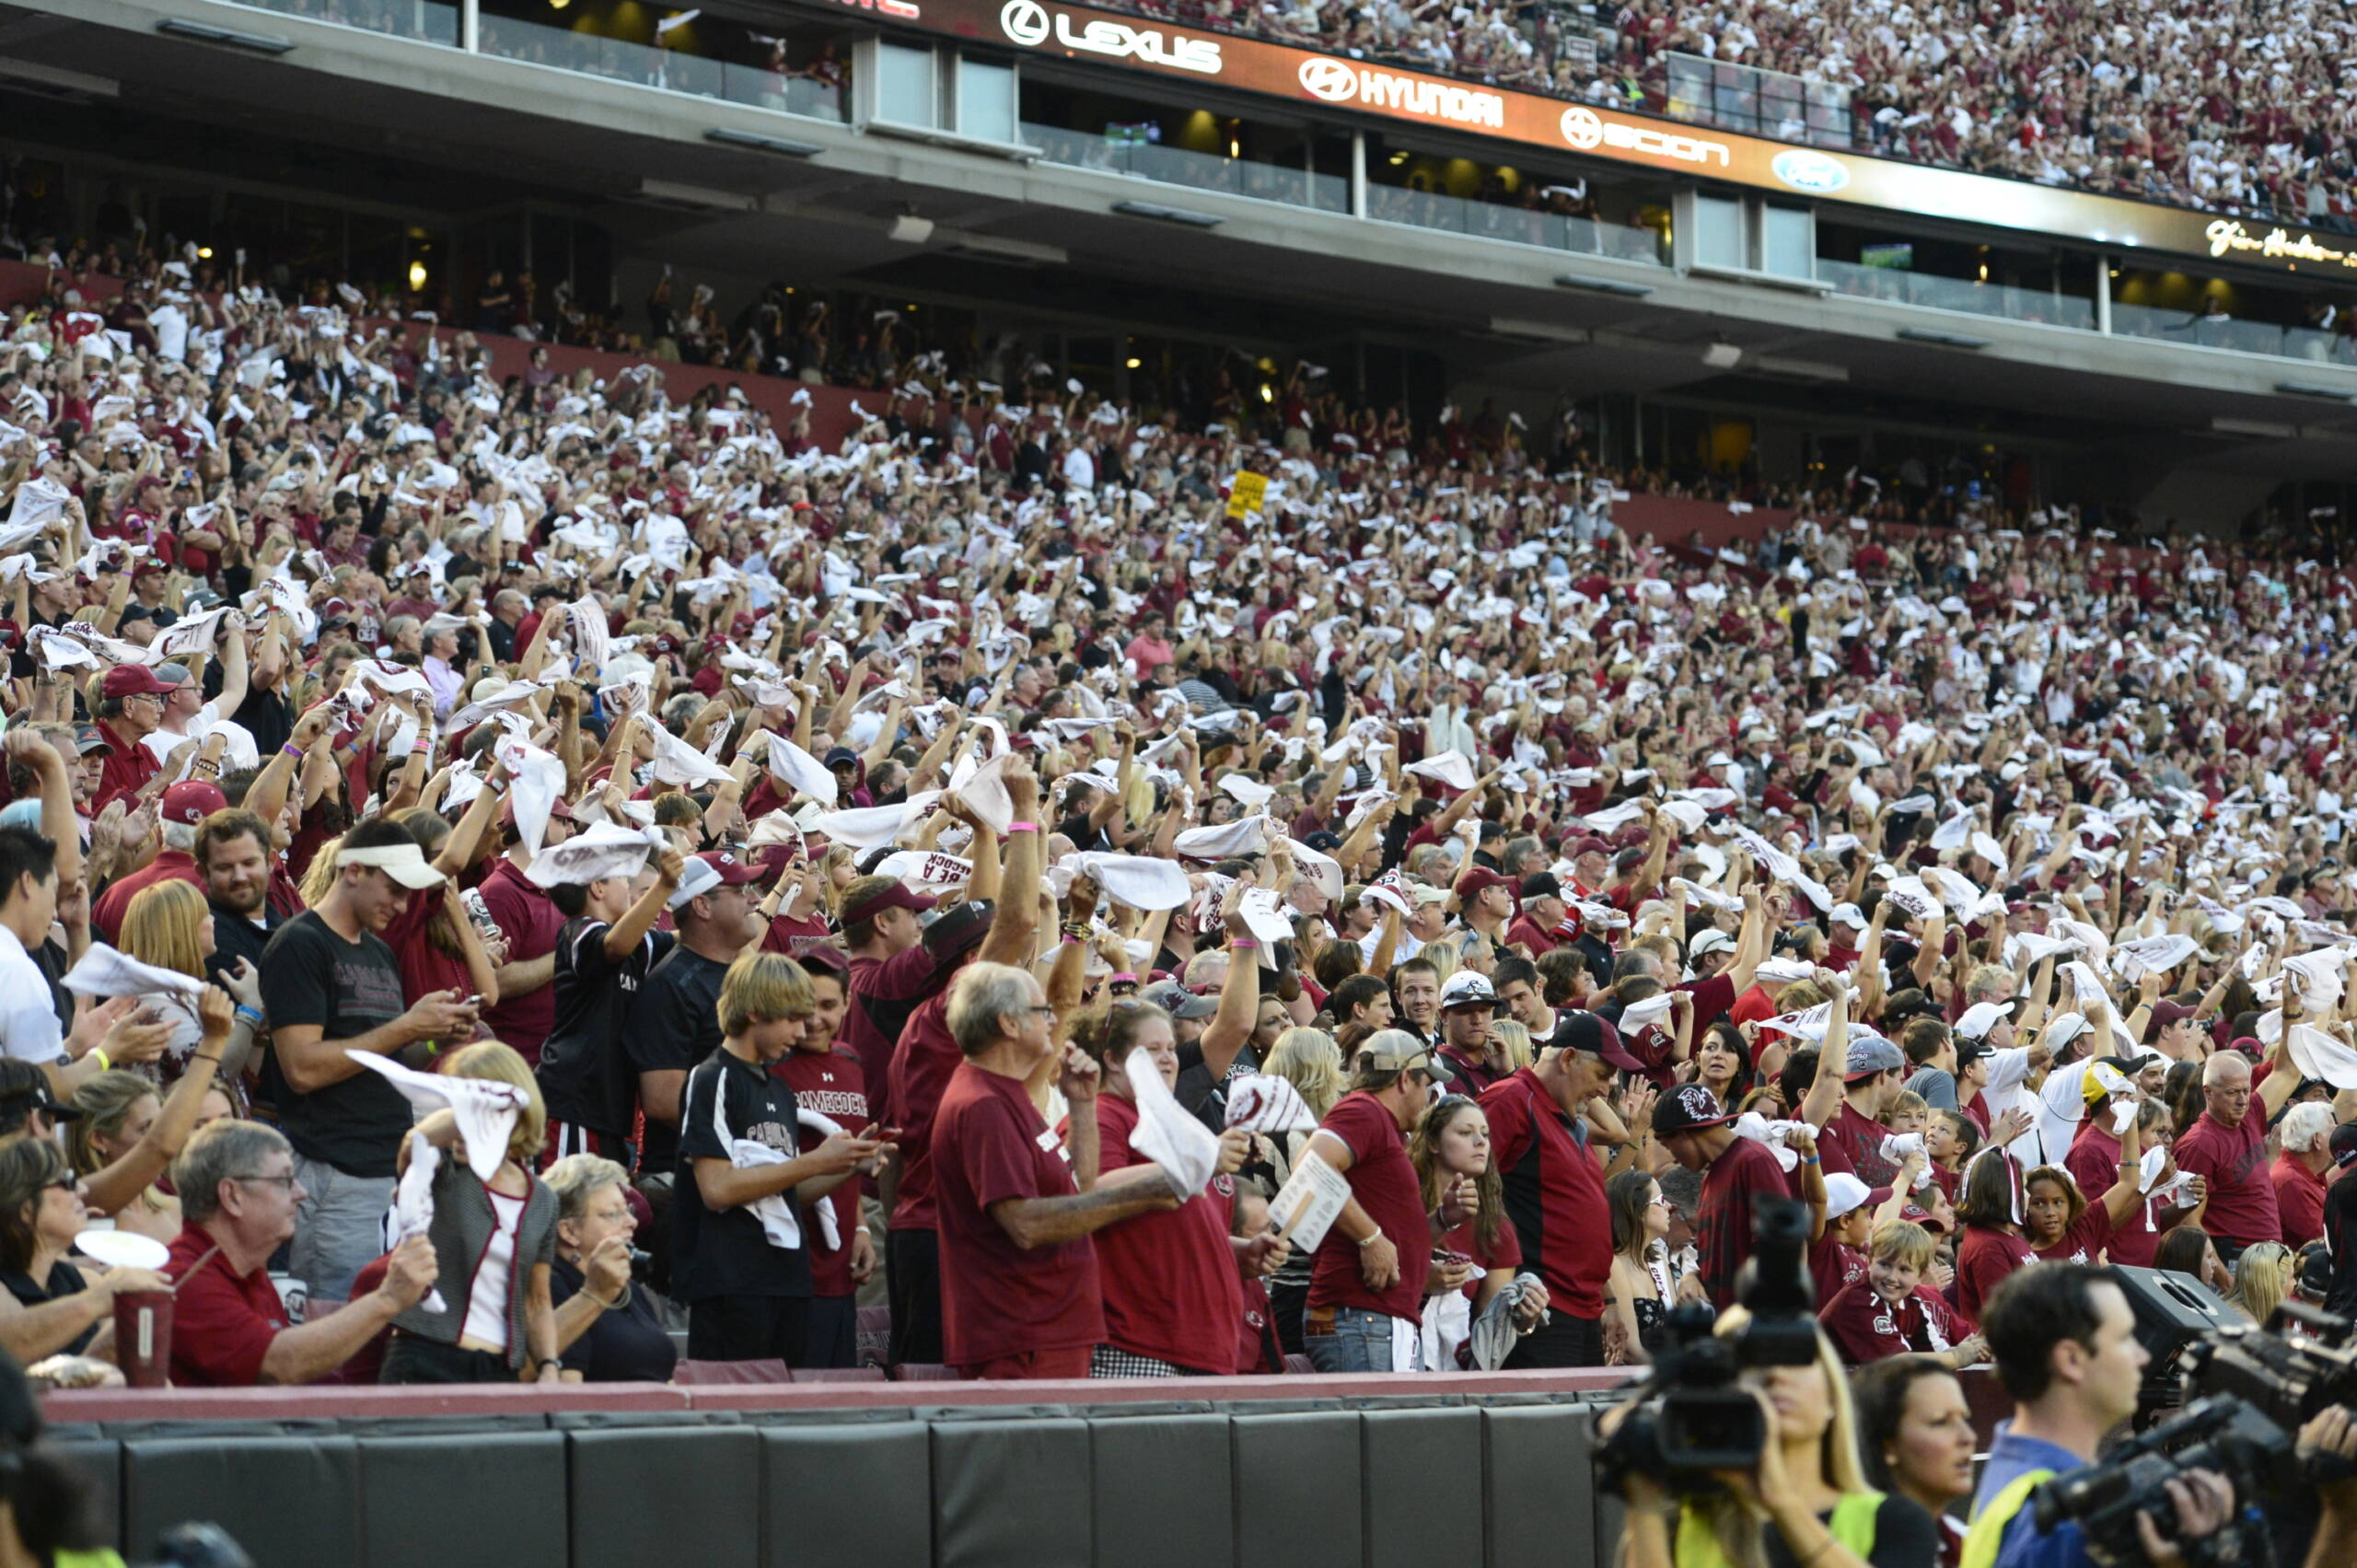 Fans Encouraged to Arrive Early for Saturday's Game